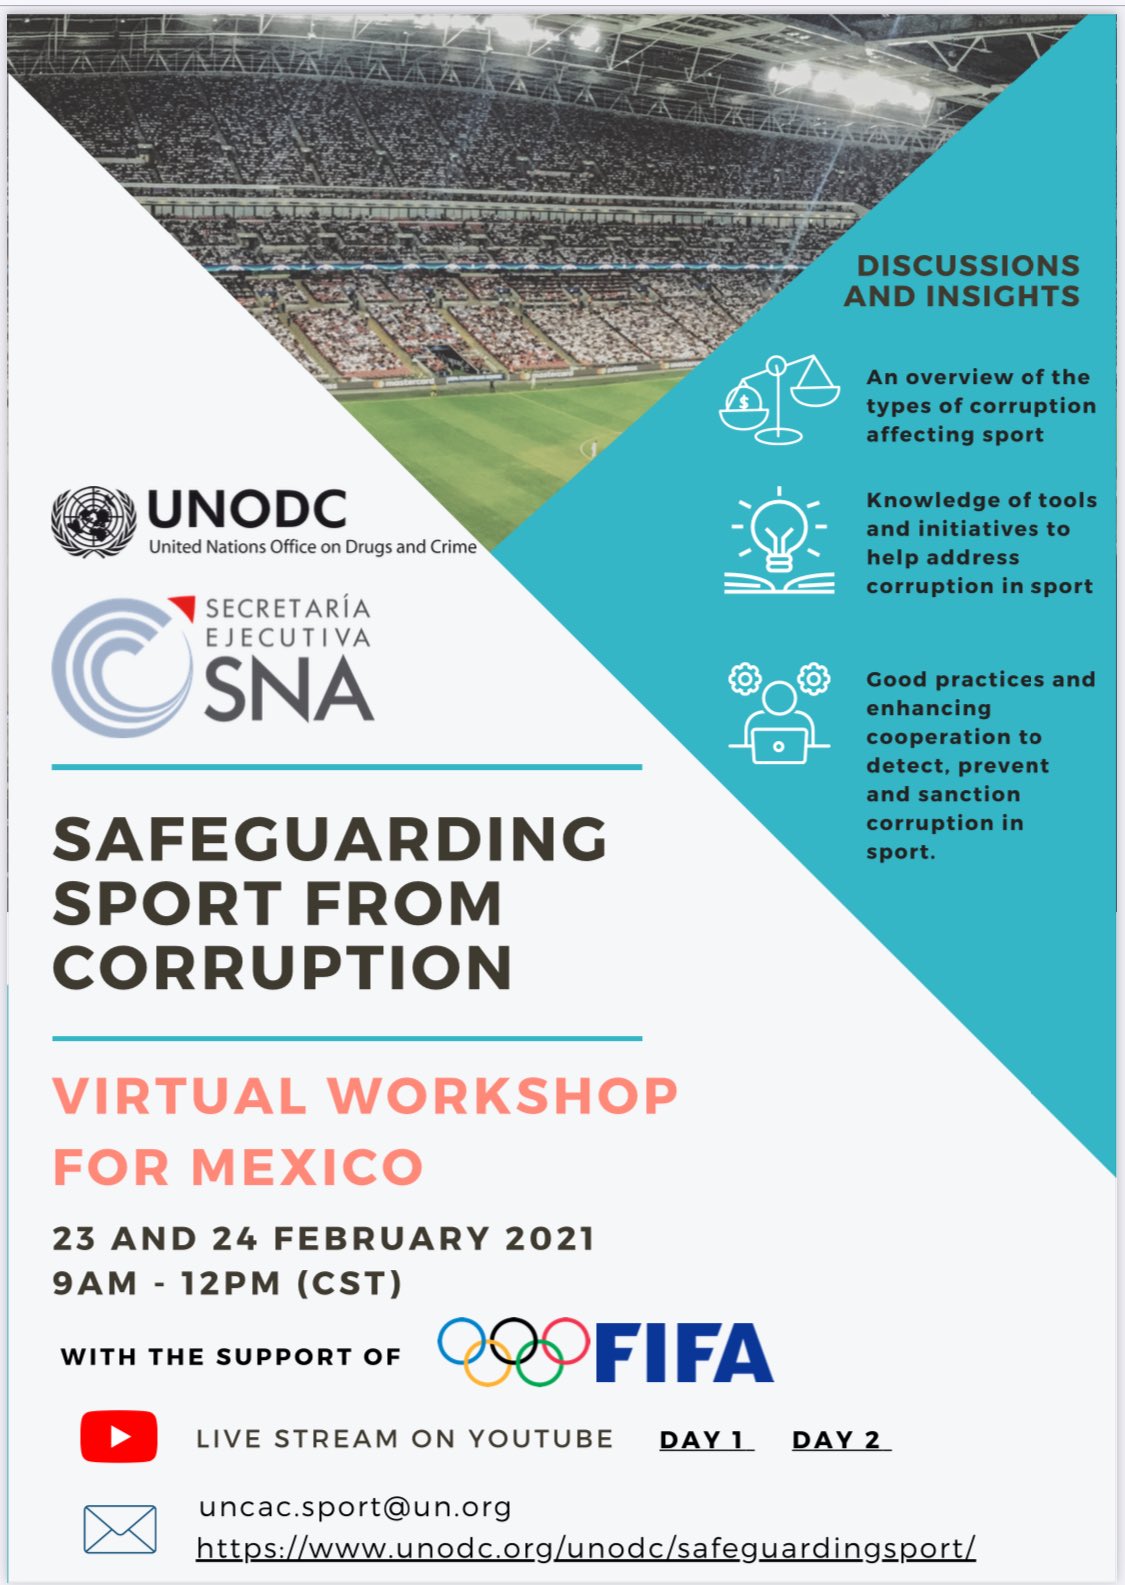 Safeguarding sport from corruption